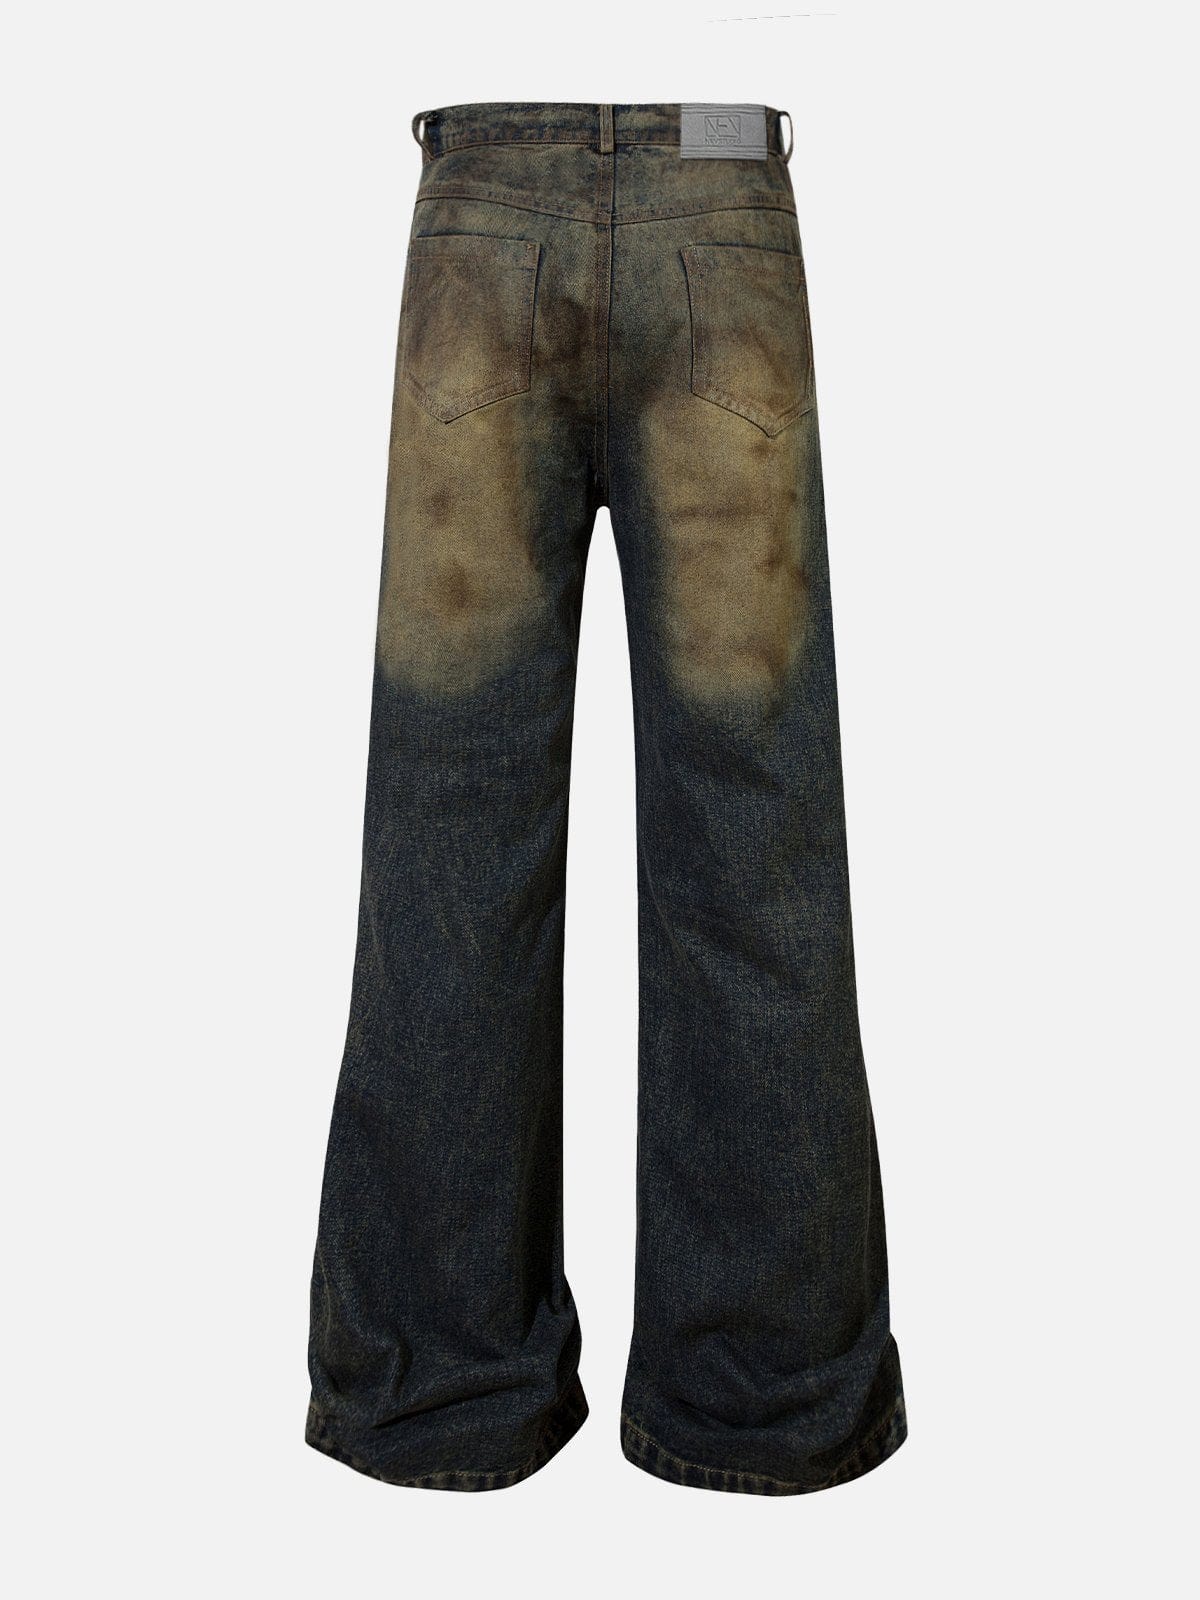 NEV Wasteland Style Mud-Dyed Bootcut Jeans